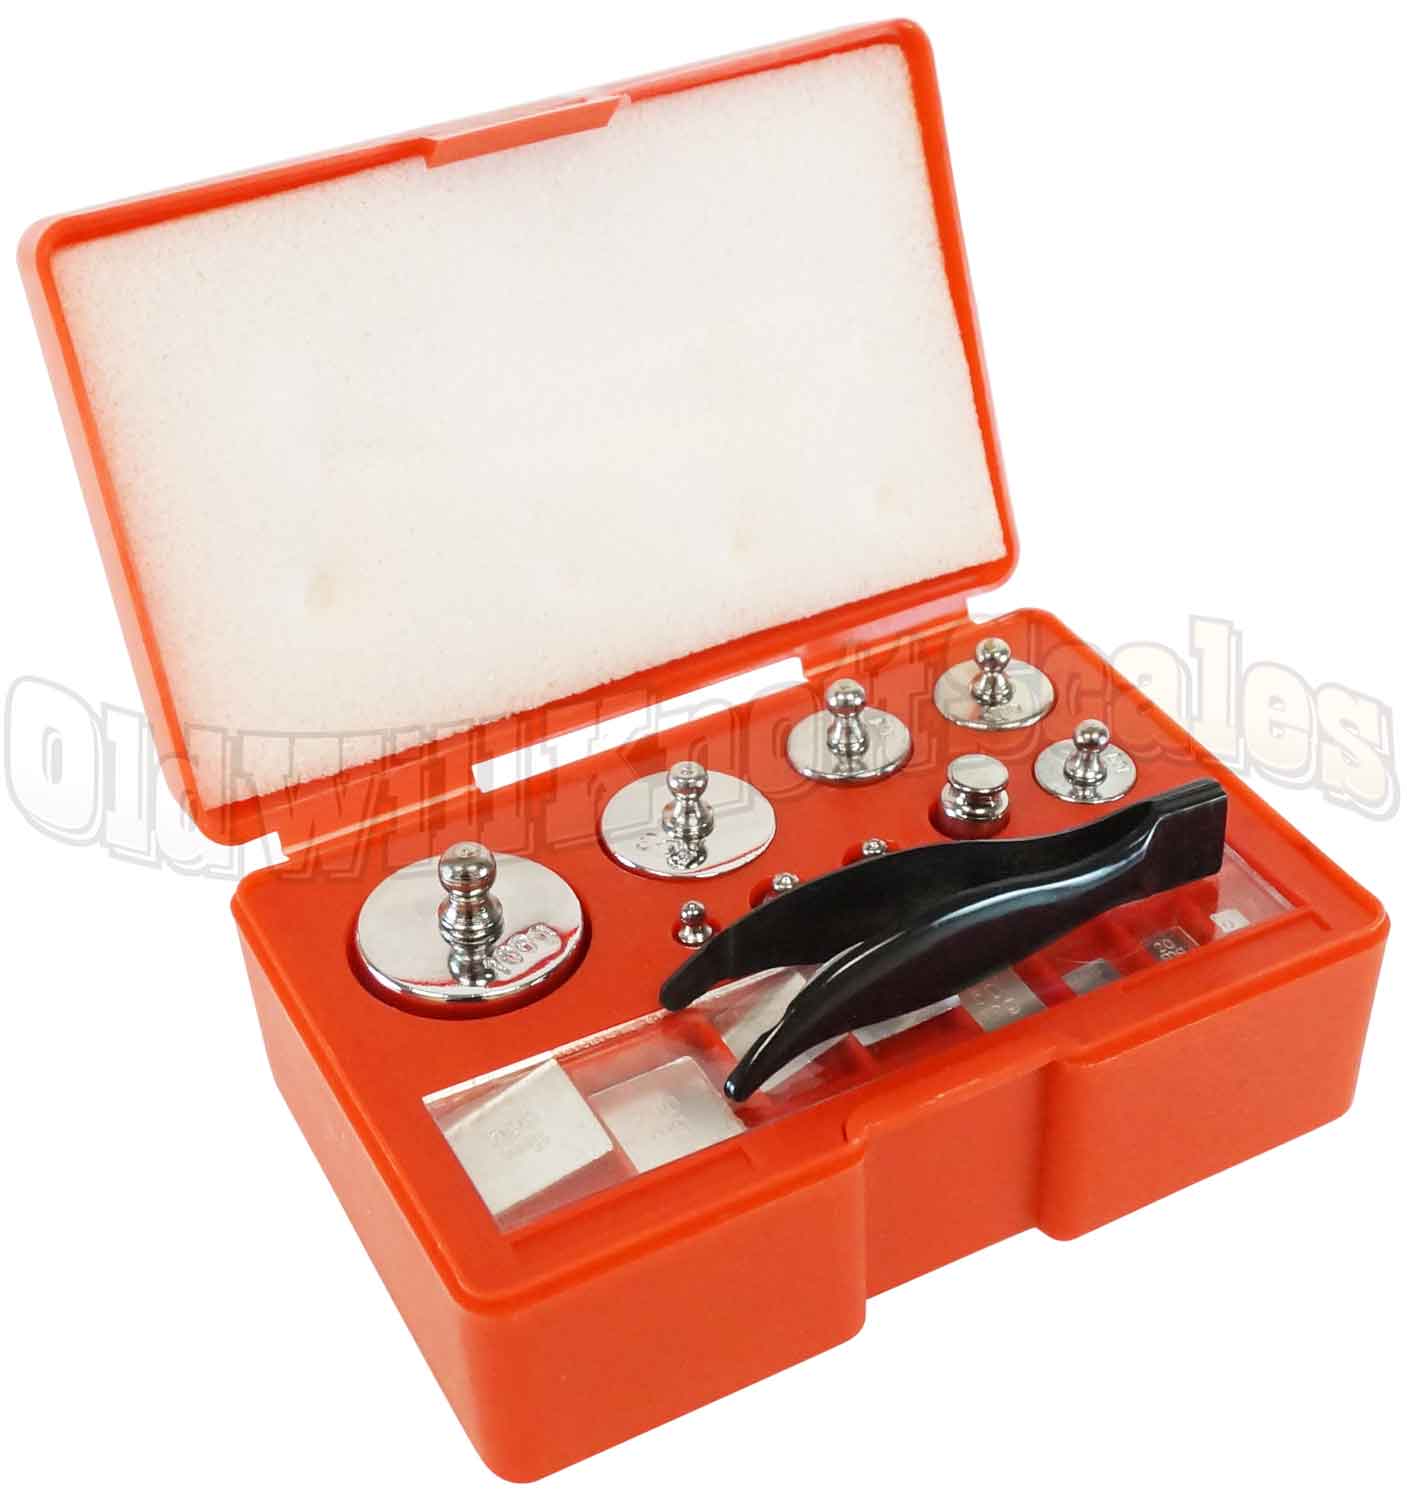 10mg-100g High Precision Grade Test Jewelry Scale,Balance Weight Calibration Weight 17 Pcs Calibration Weights Set 